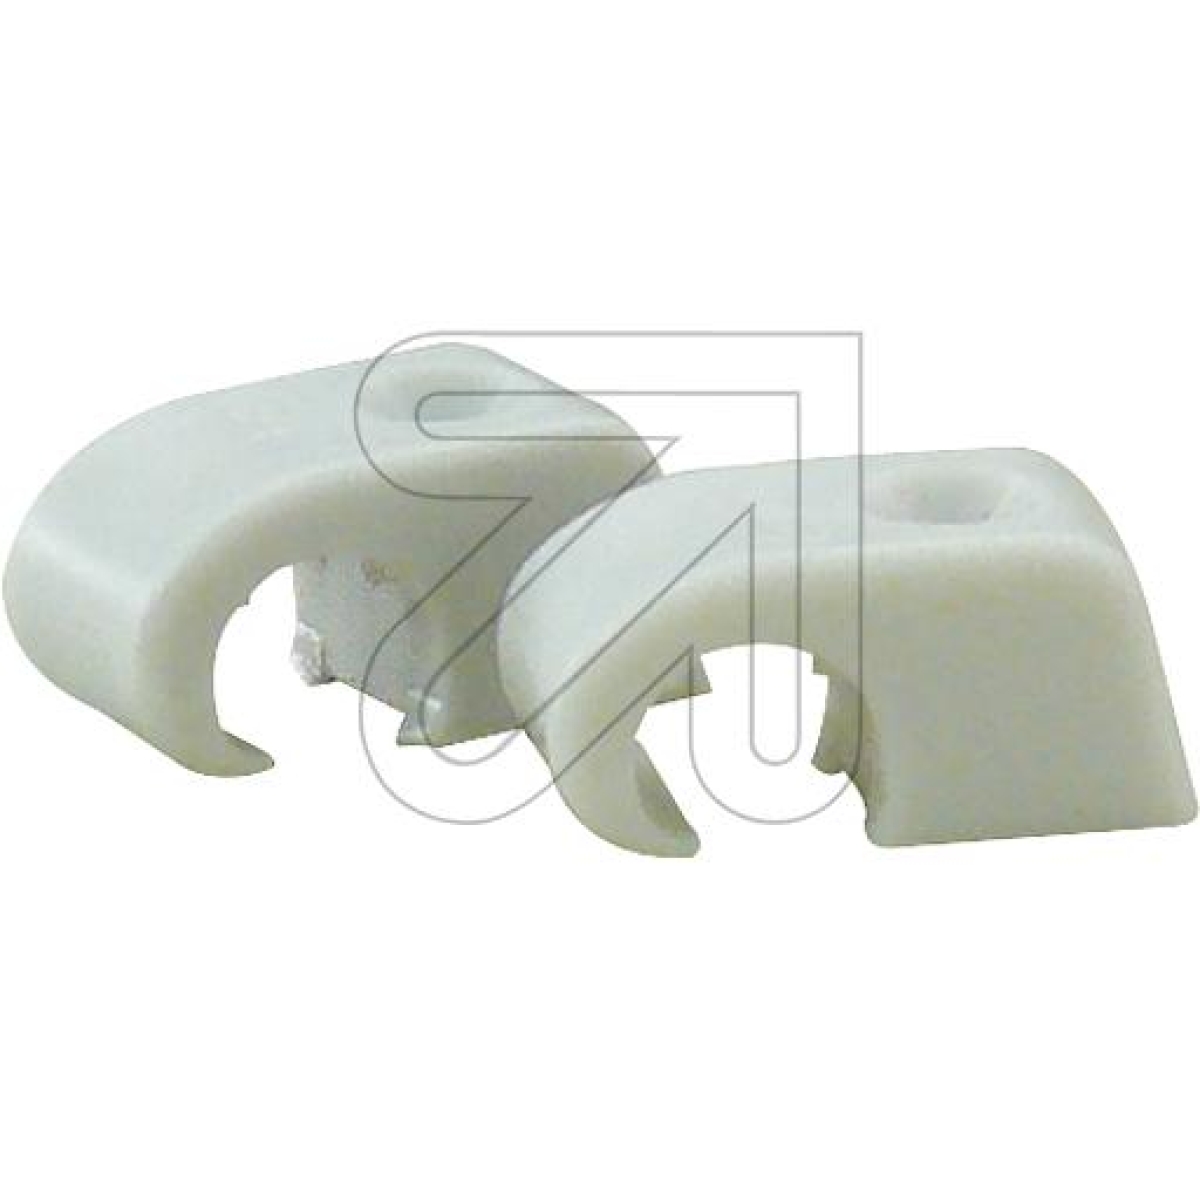 Don QuichoteLightning clamps WB 11 903811 (60868)-Price for 100 pcs.Article-No: 191015